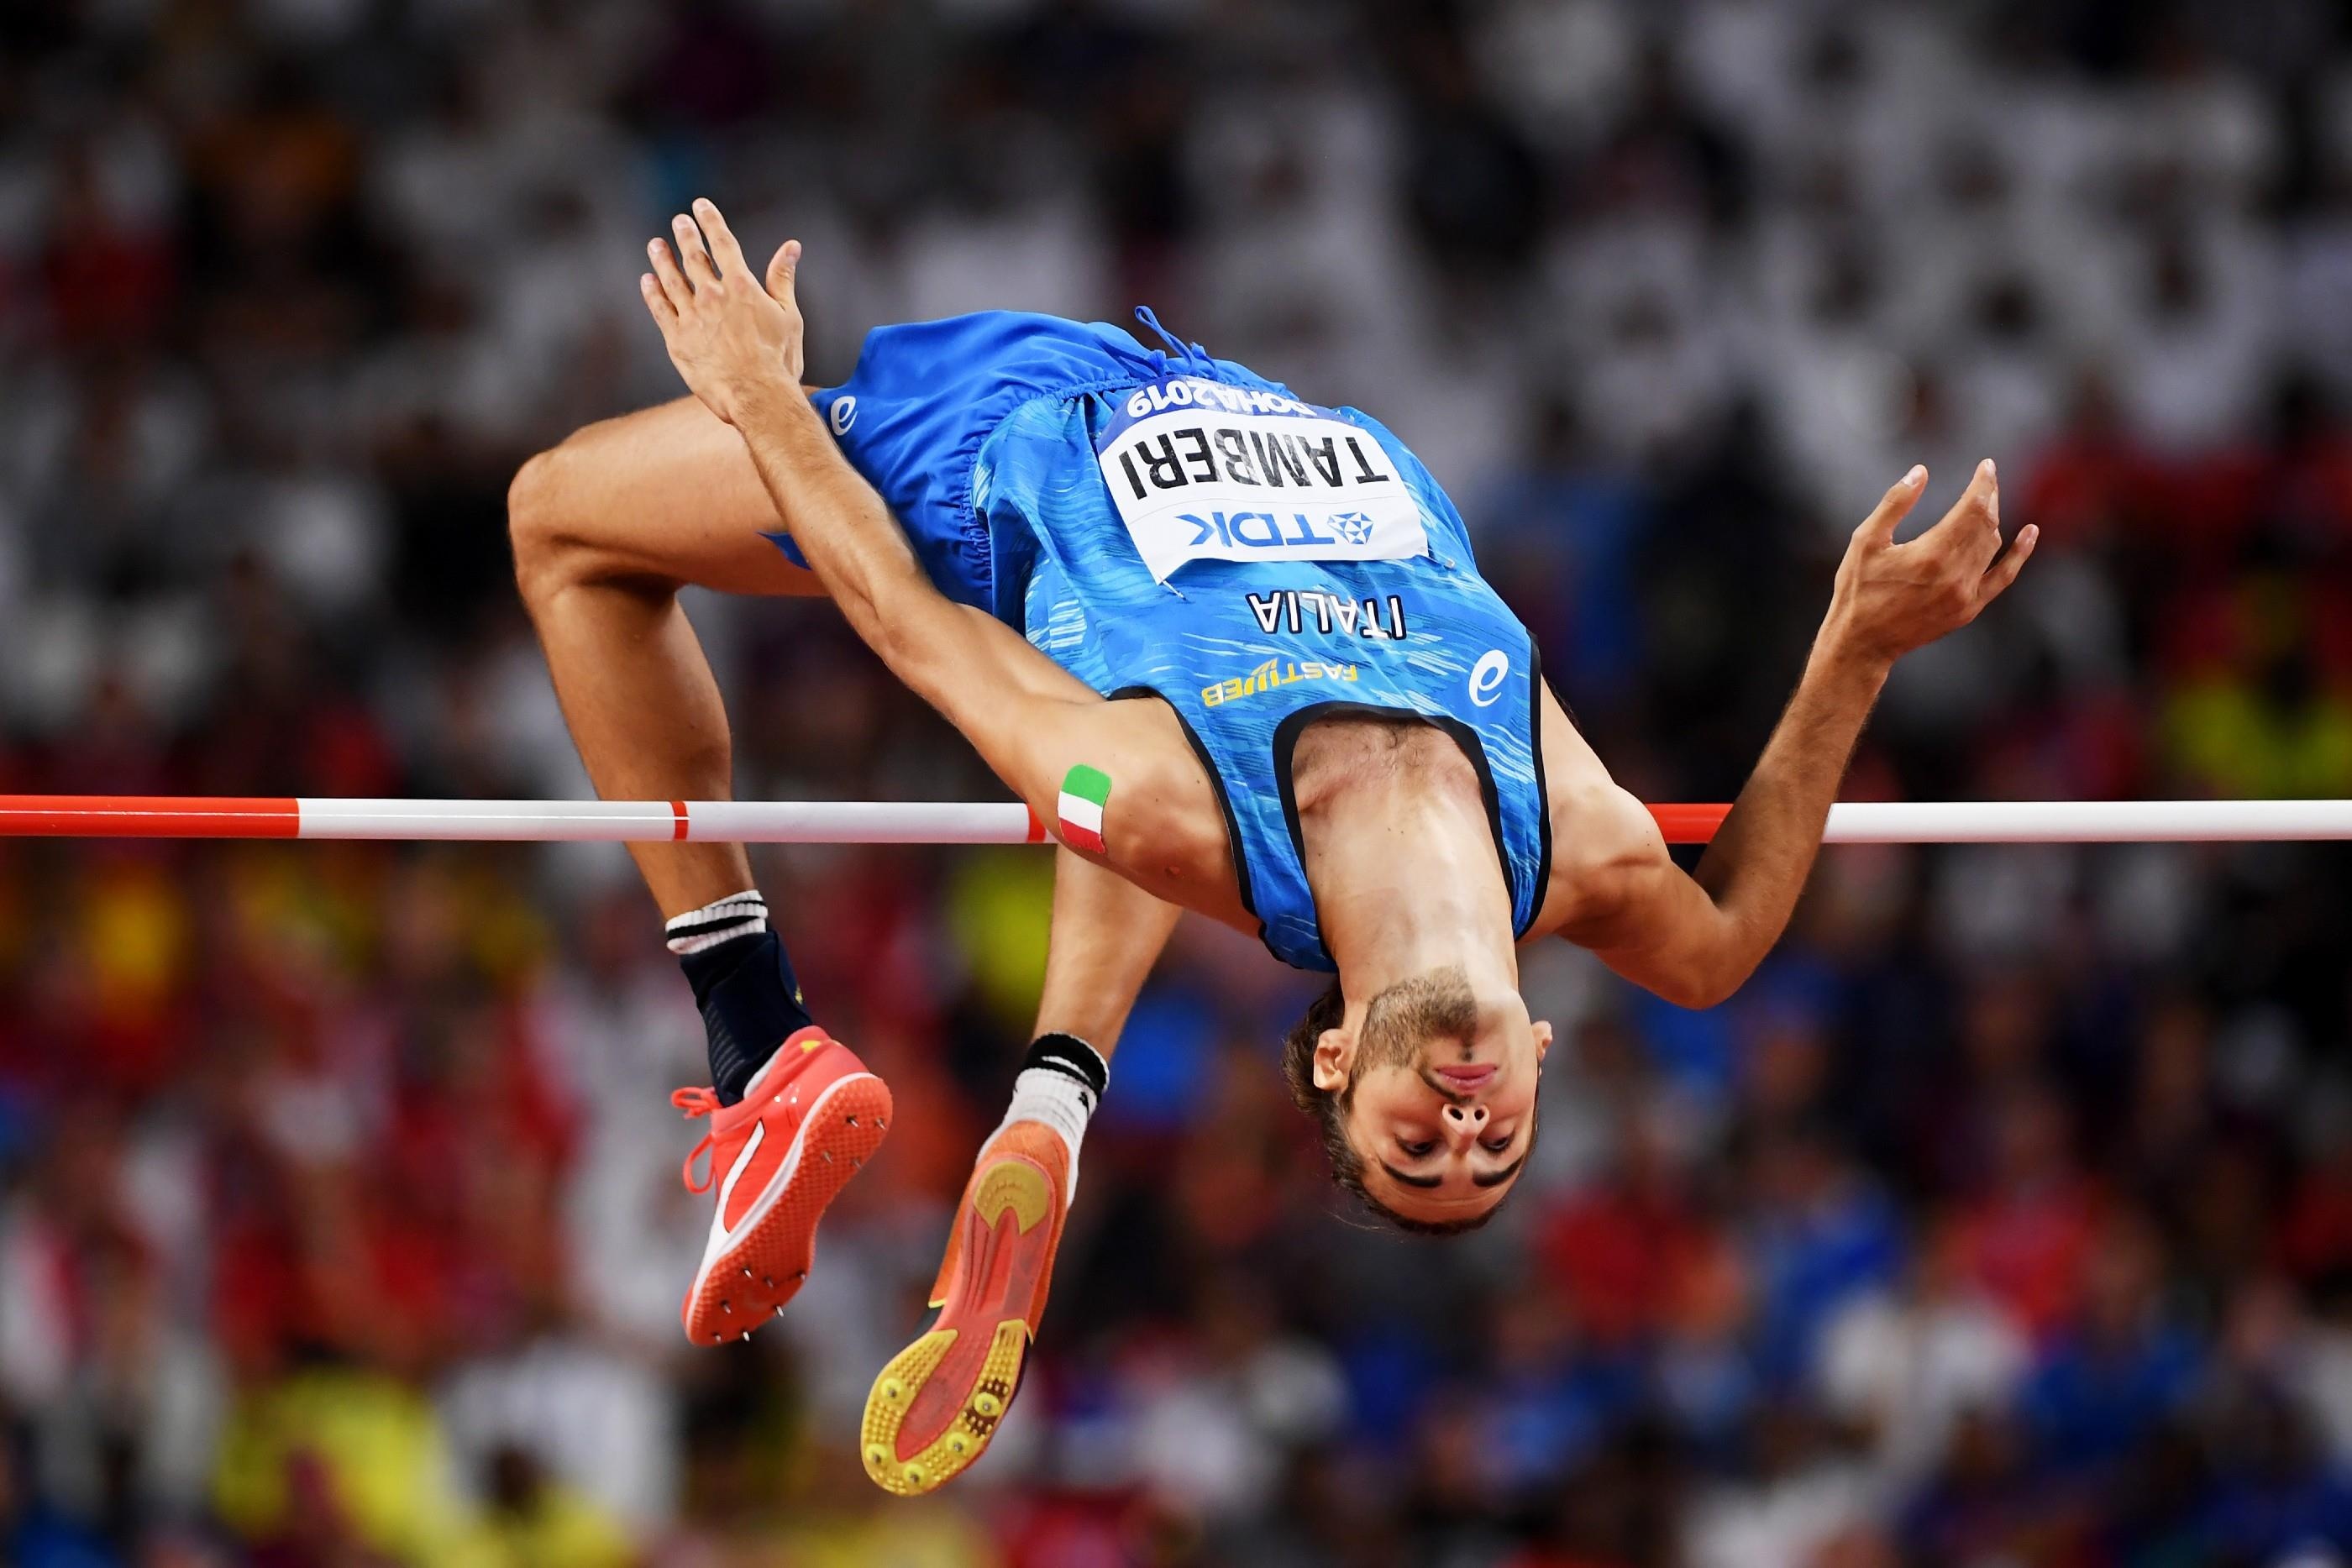 Jumping: High Jump, Gianmarco Tamberi, Track and field athletics, 2019 World Athletics Championships. 2800x1870 HD Background.